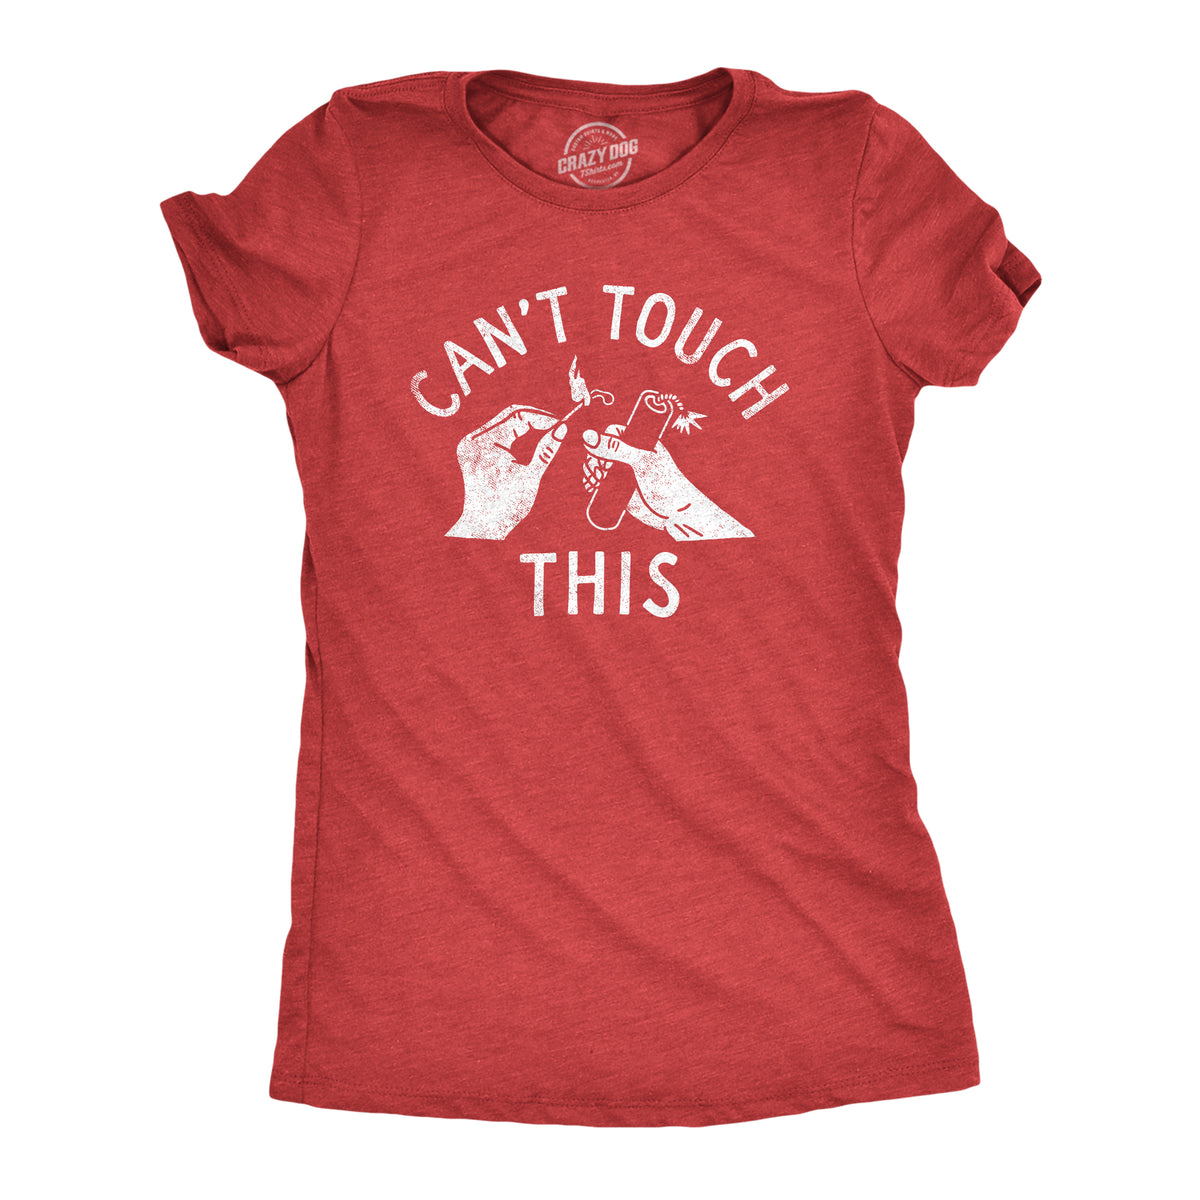 Funny Heather Red - TOUCH Cant Touch This Womens T Shirt Nerdy Sarcastic Tee